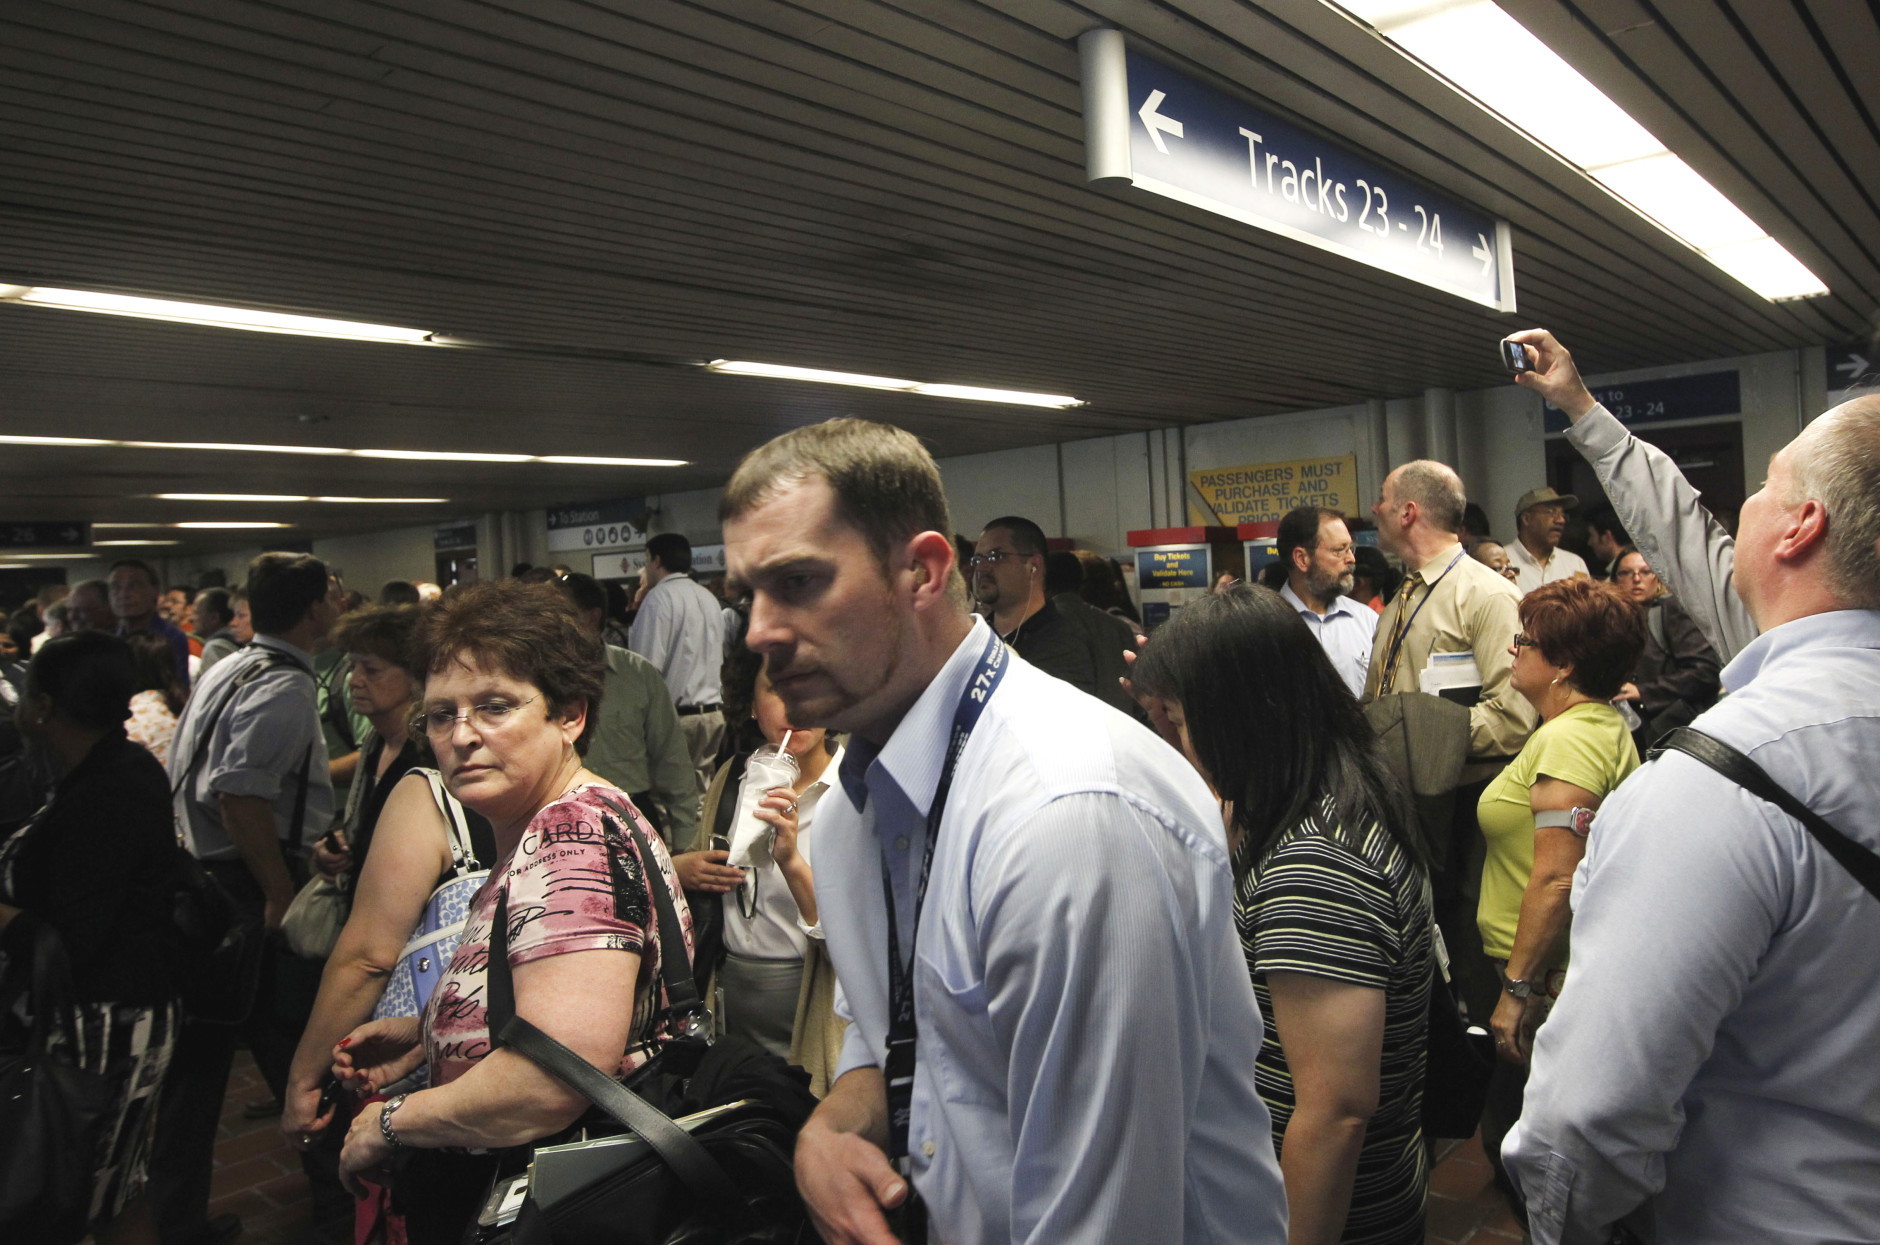 Passengers crowd the platform of a commuter train as they wait for it to arrive at Union Station in Washington, Tuesday, Aug. 23,2011, after an earthquake in the Washington area. A 5.9 magnitude earthquake centered in Virginia forced evacuations of all the monuments on the National Mall in Washington and rattled nerves from Georgia to Martha's Vineyard, the Massachusetts island where President Barack Obama is vacationing. No injuries were immediately reported.  (AP Photo/Charles Dharapak)